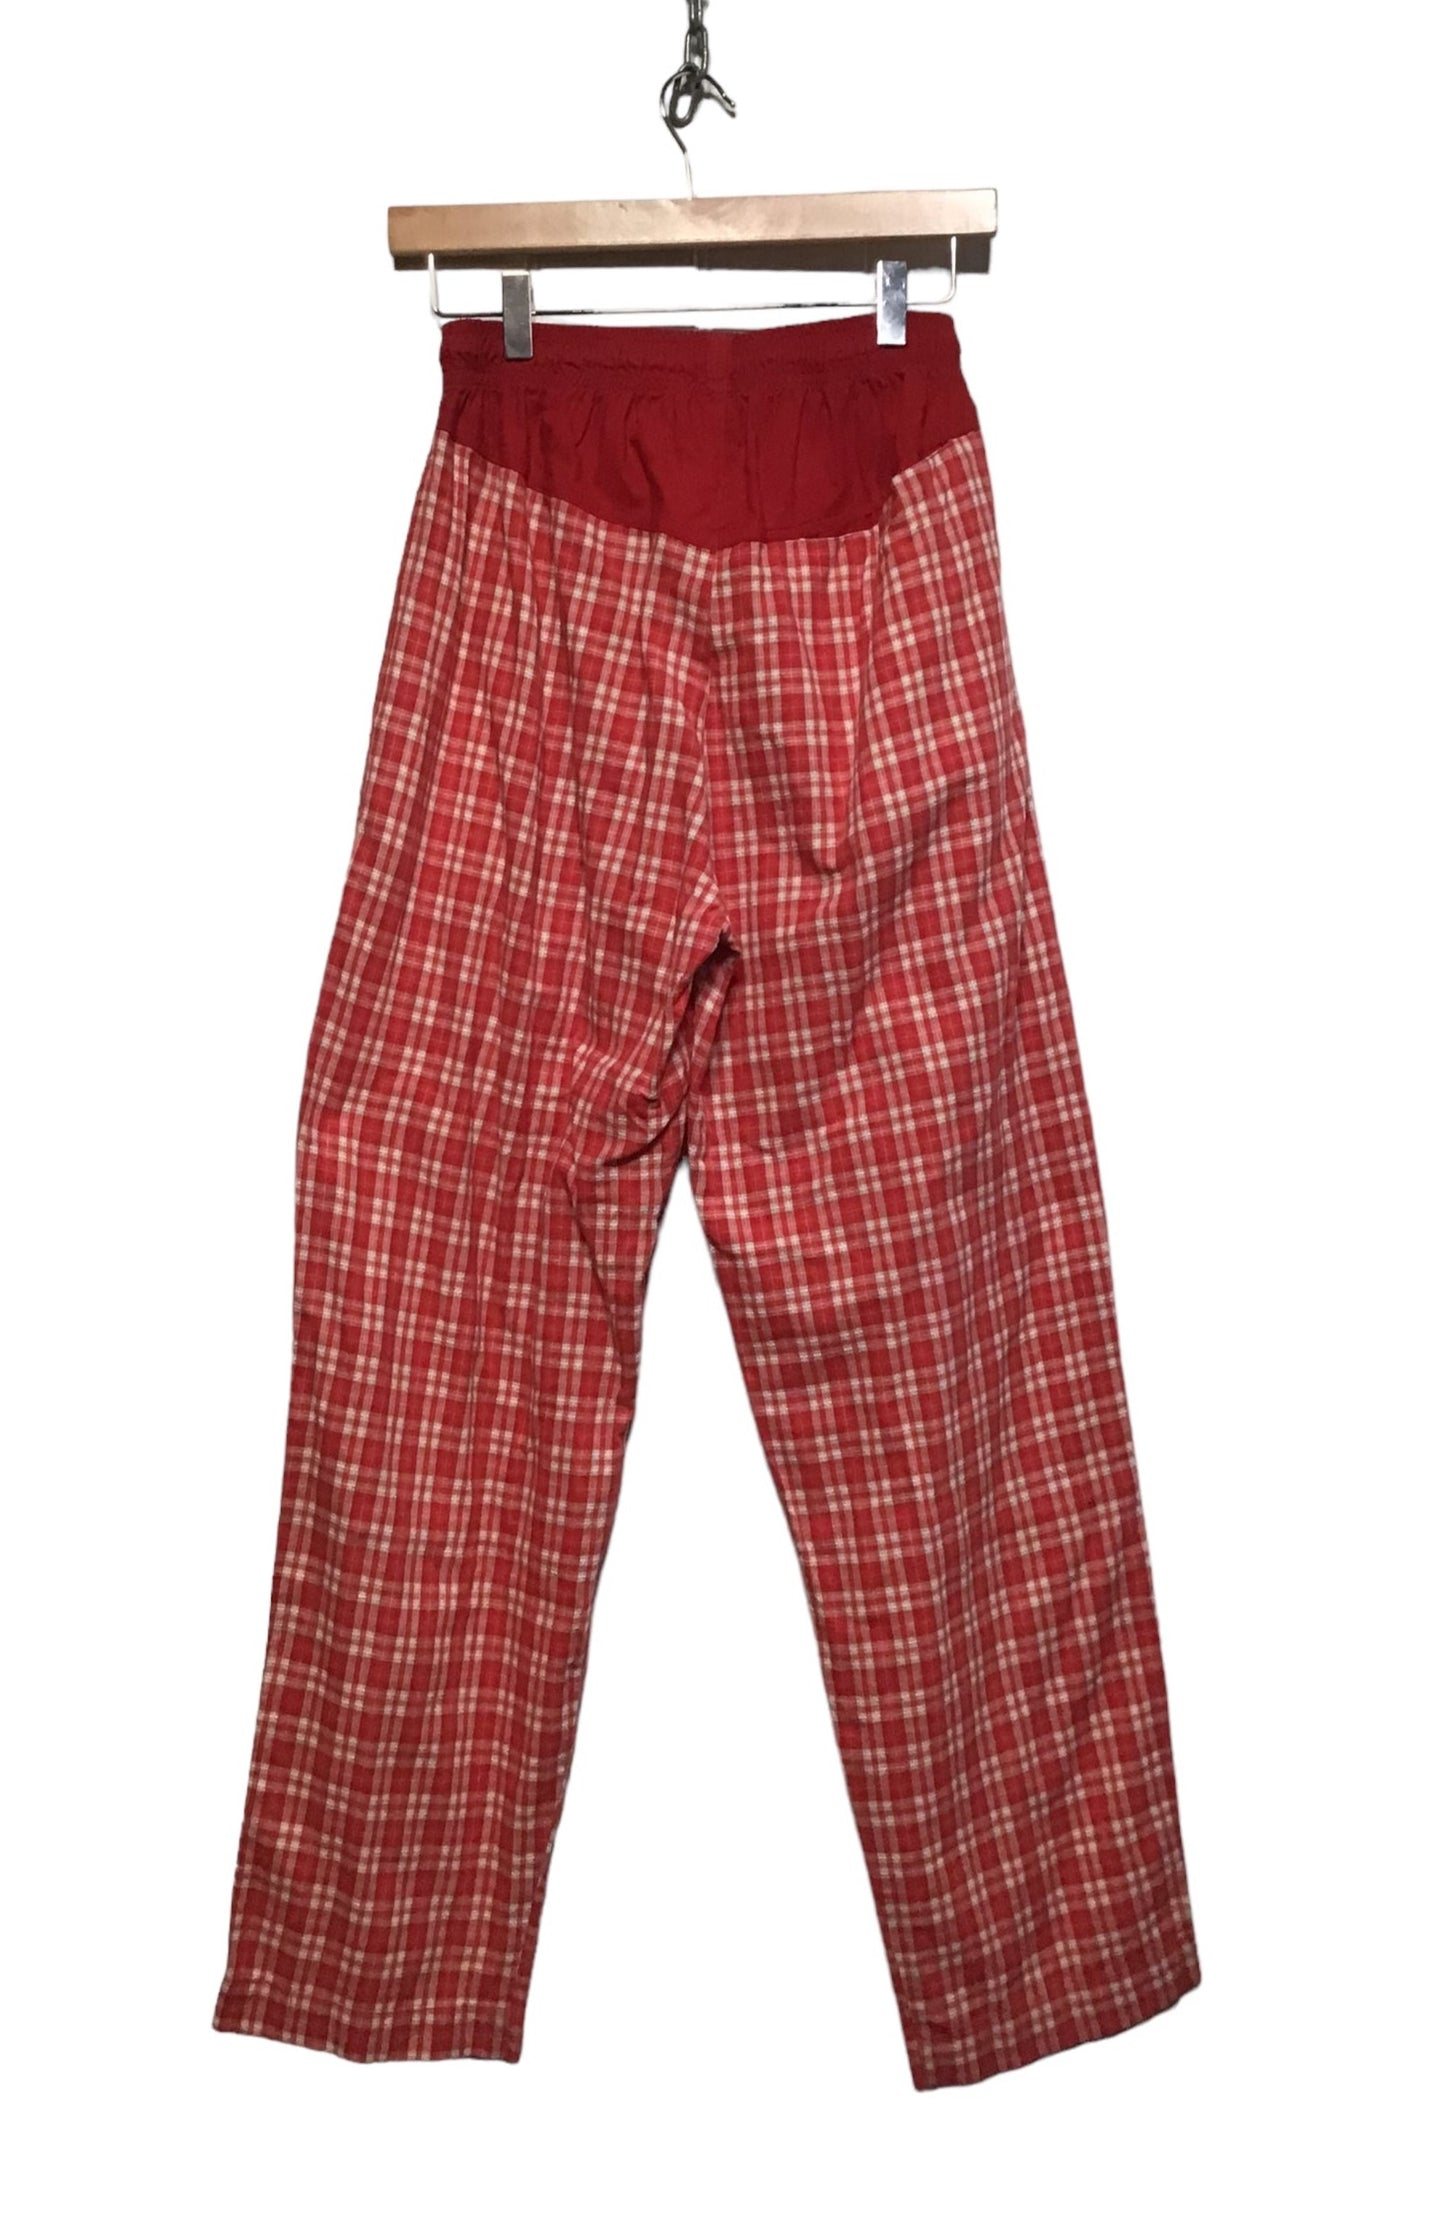 Red Checked Trousers (Size S)